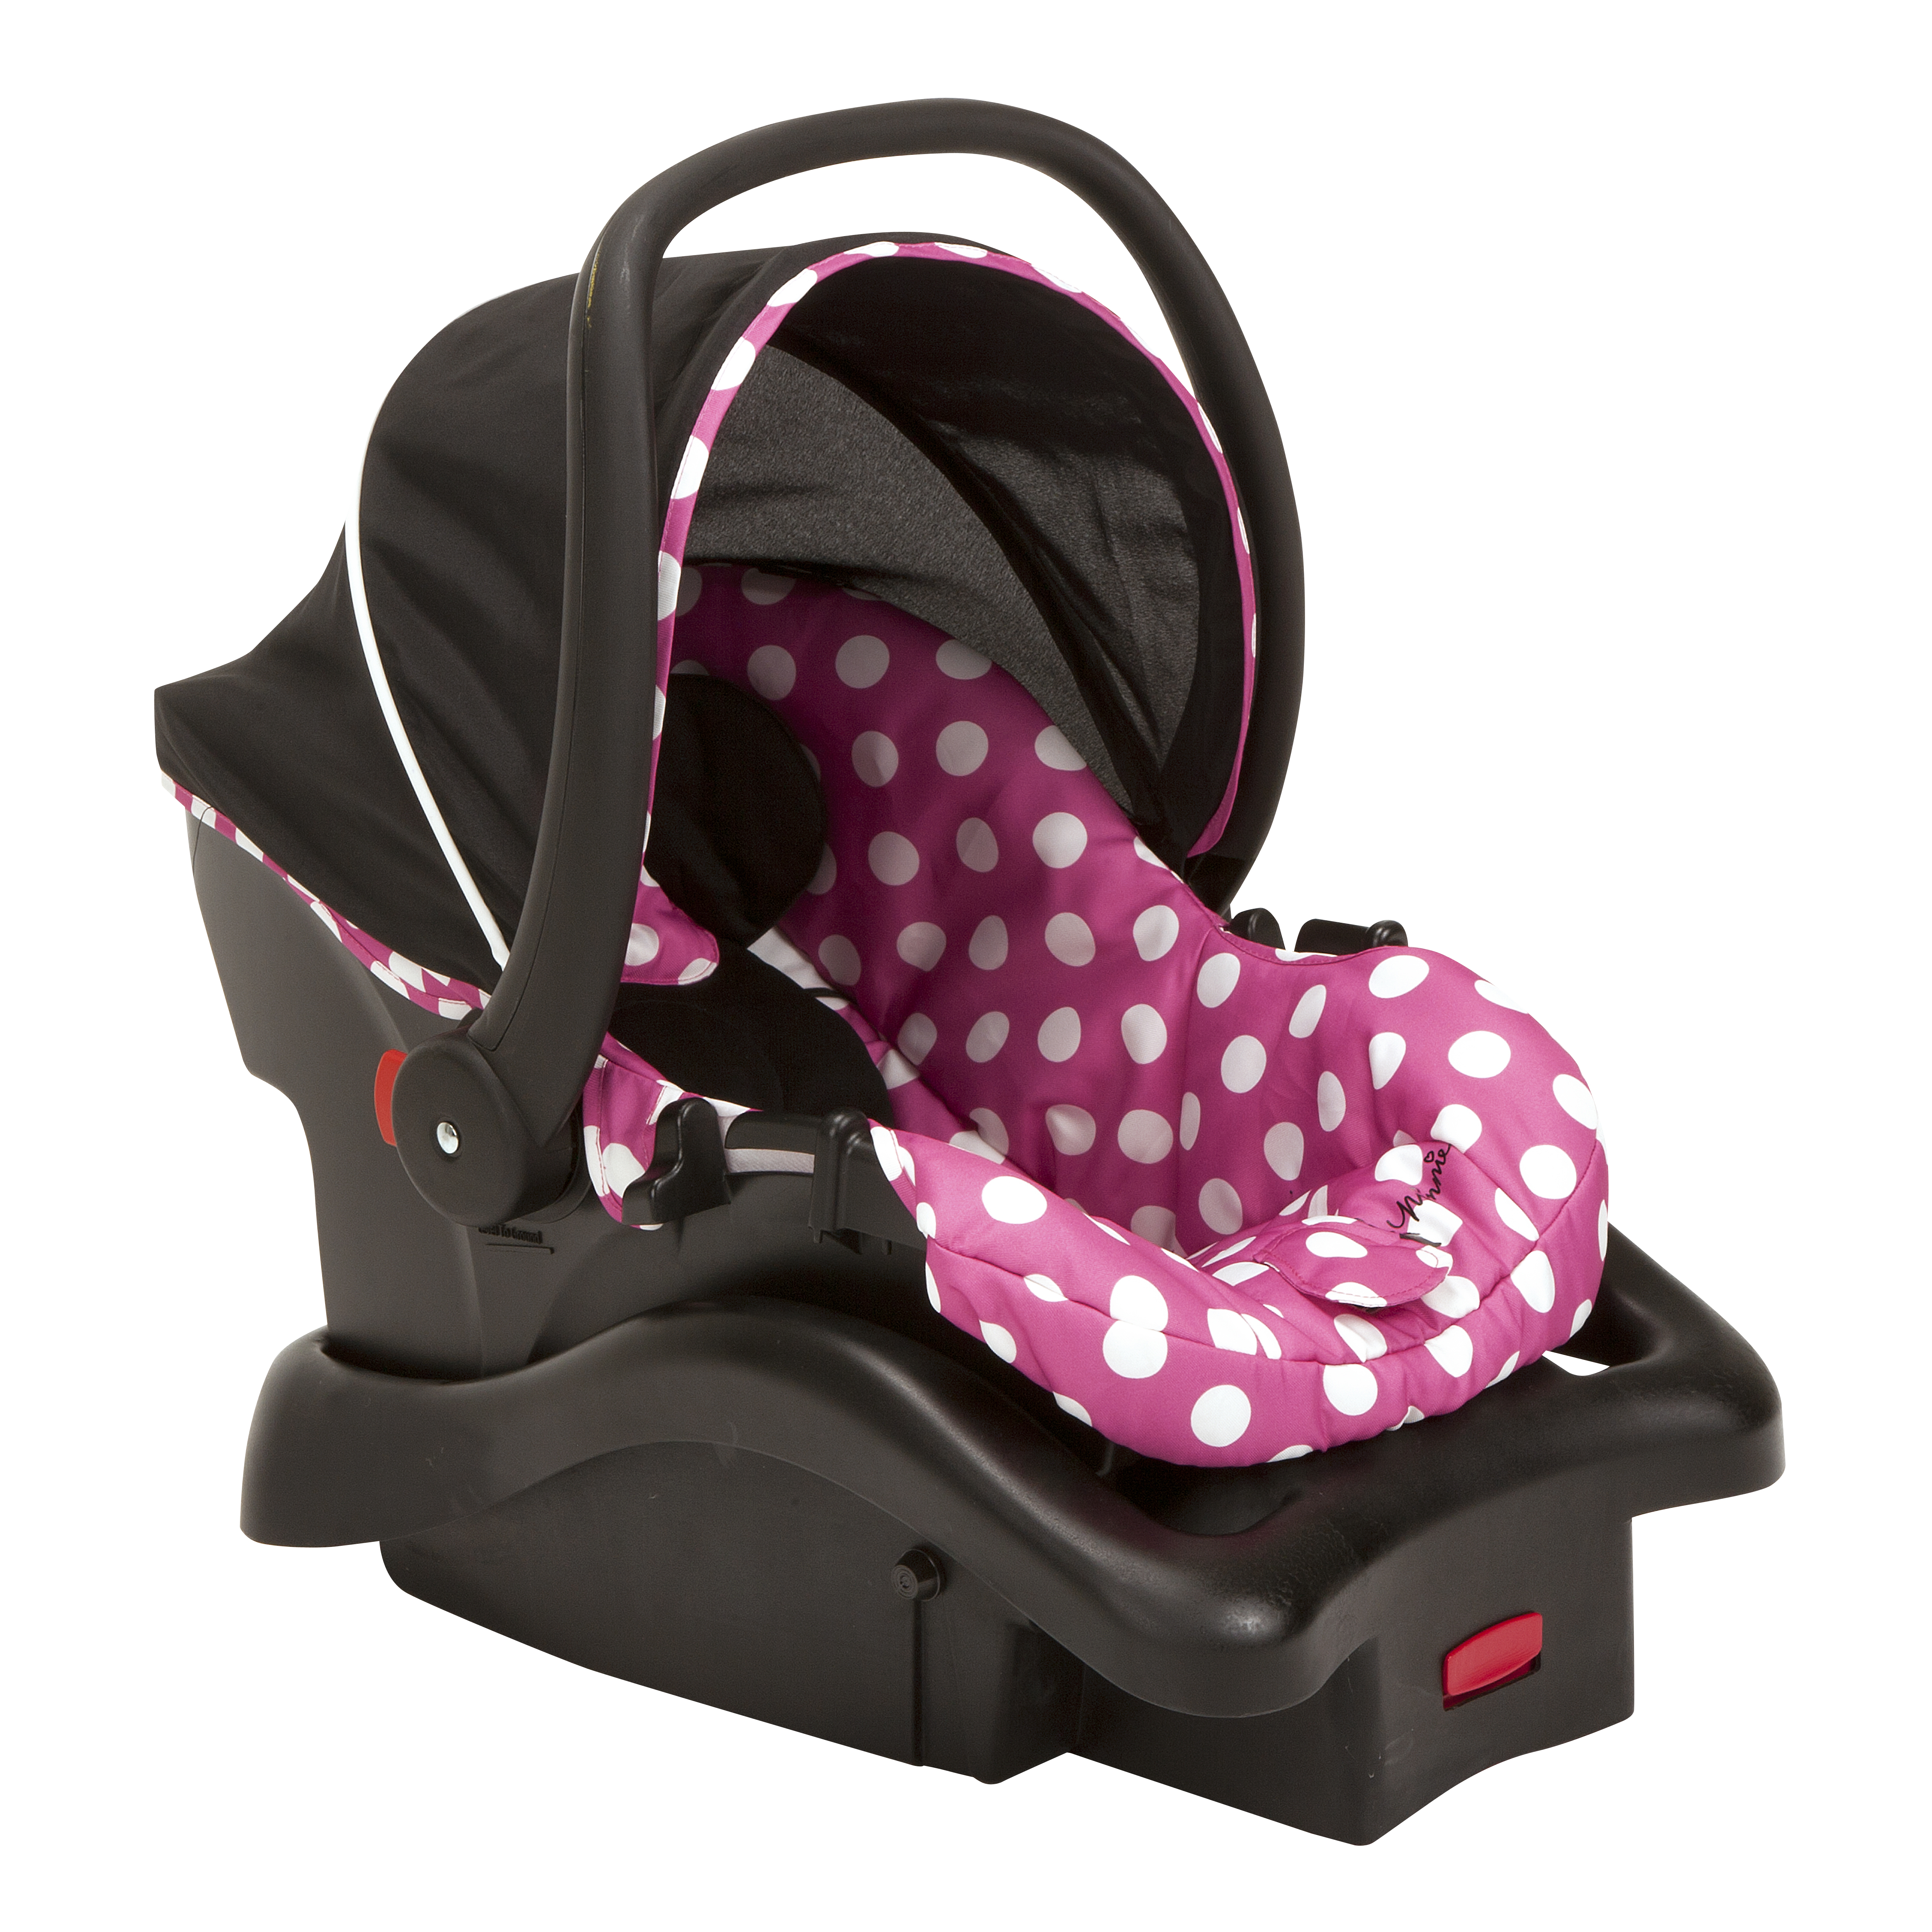 minnie mouse stroller with car seat